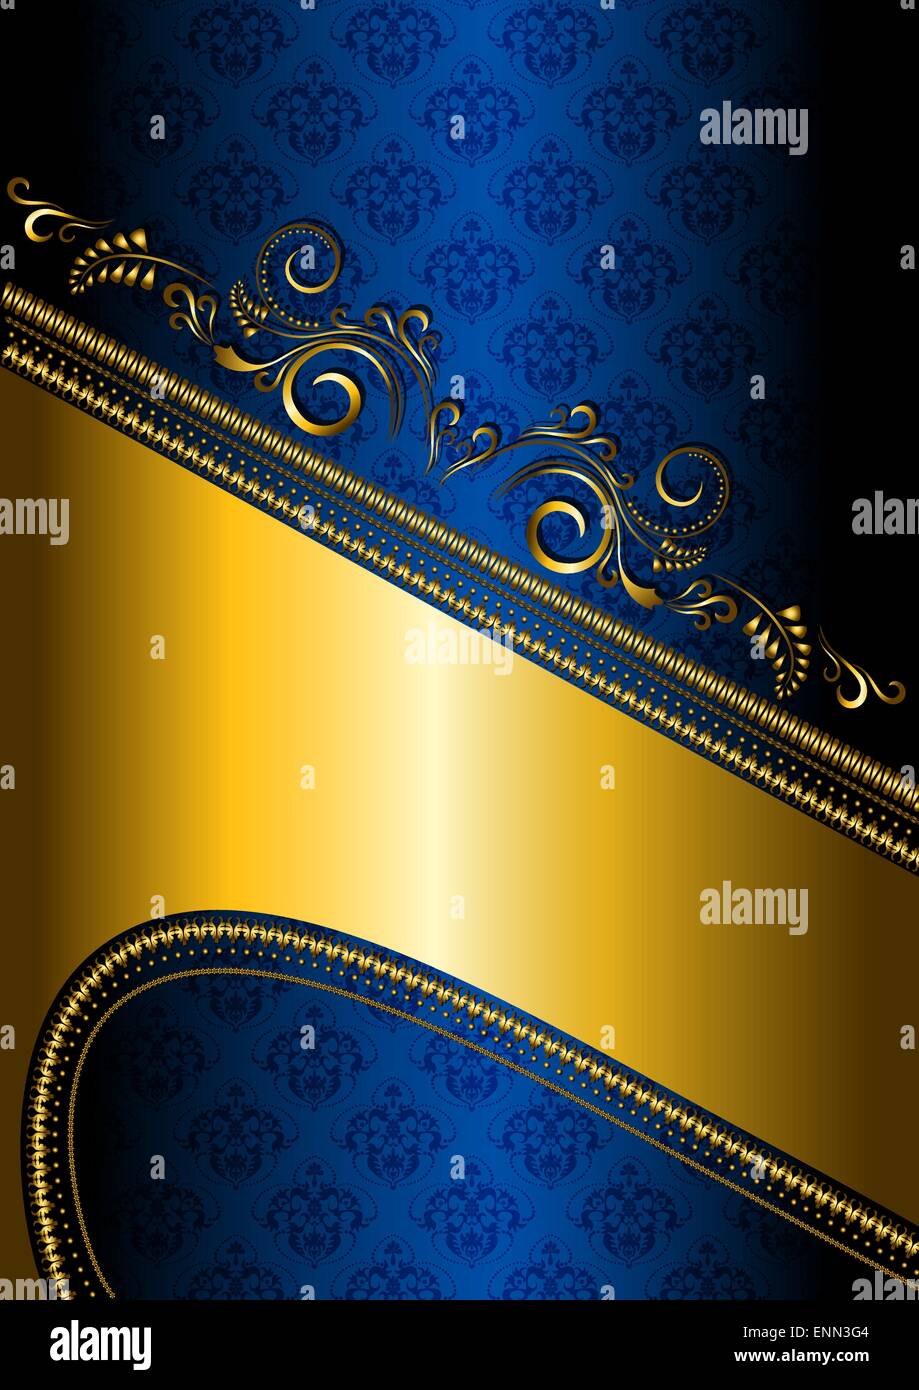 royal blue and gold backgrounds